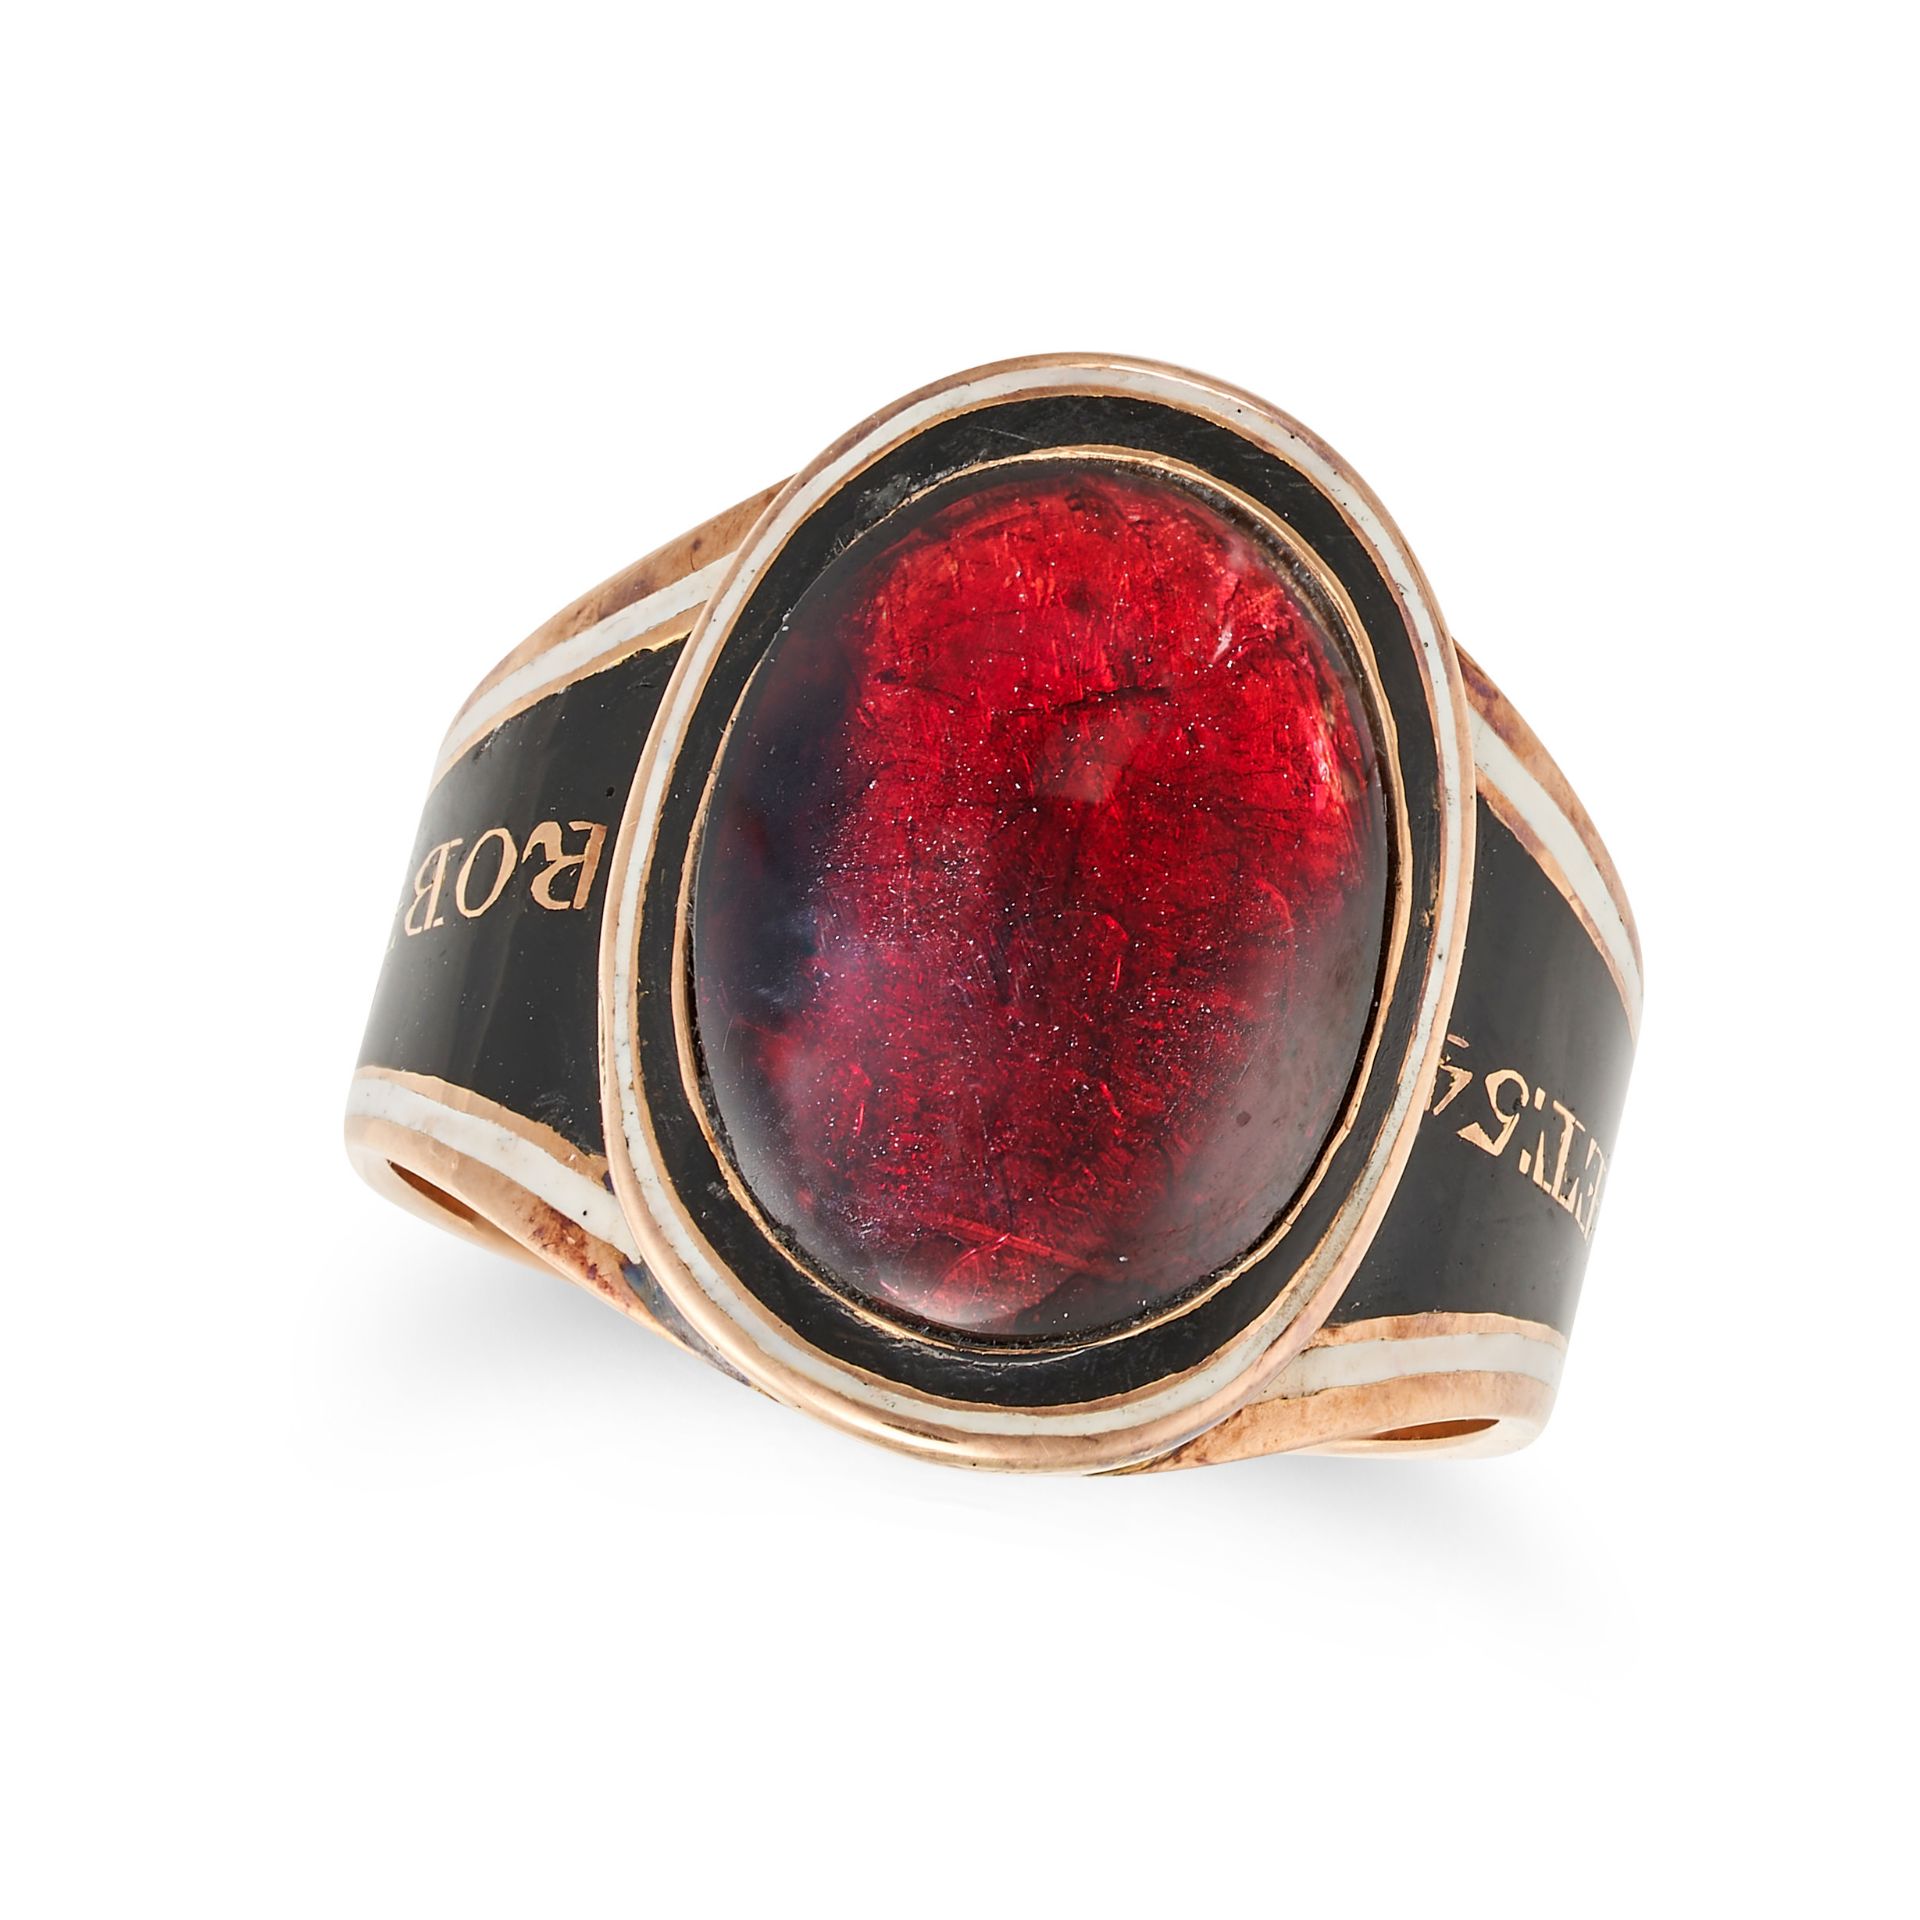 AN ANTIQUE GEORGIAN GARNET AND ENAMEL MOURNING RING in yellow gold, set with a cabochon garnet in...